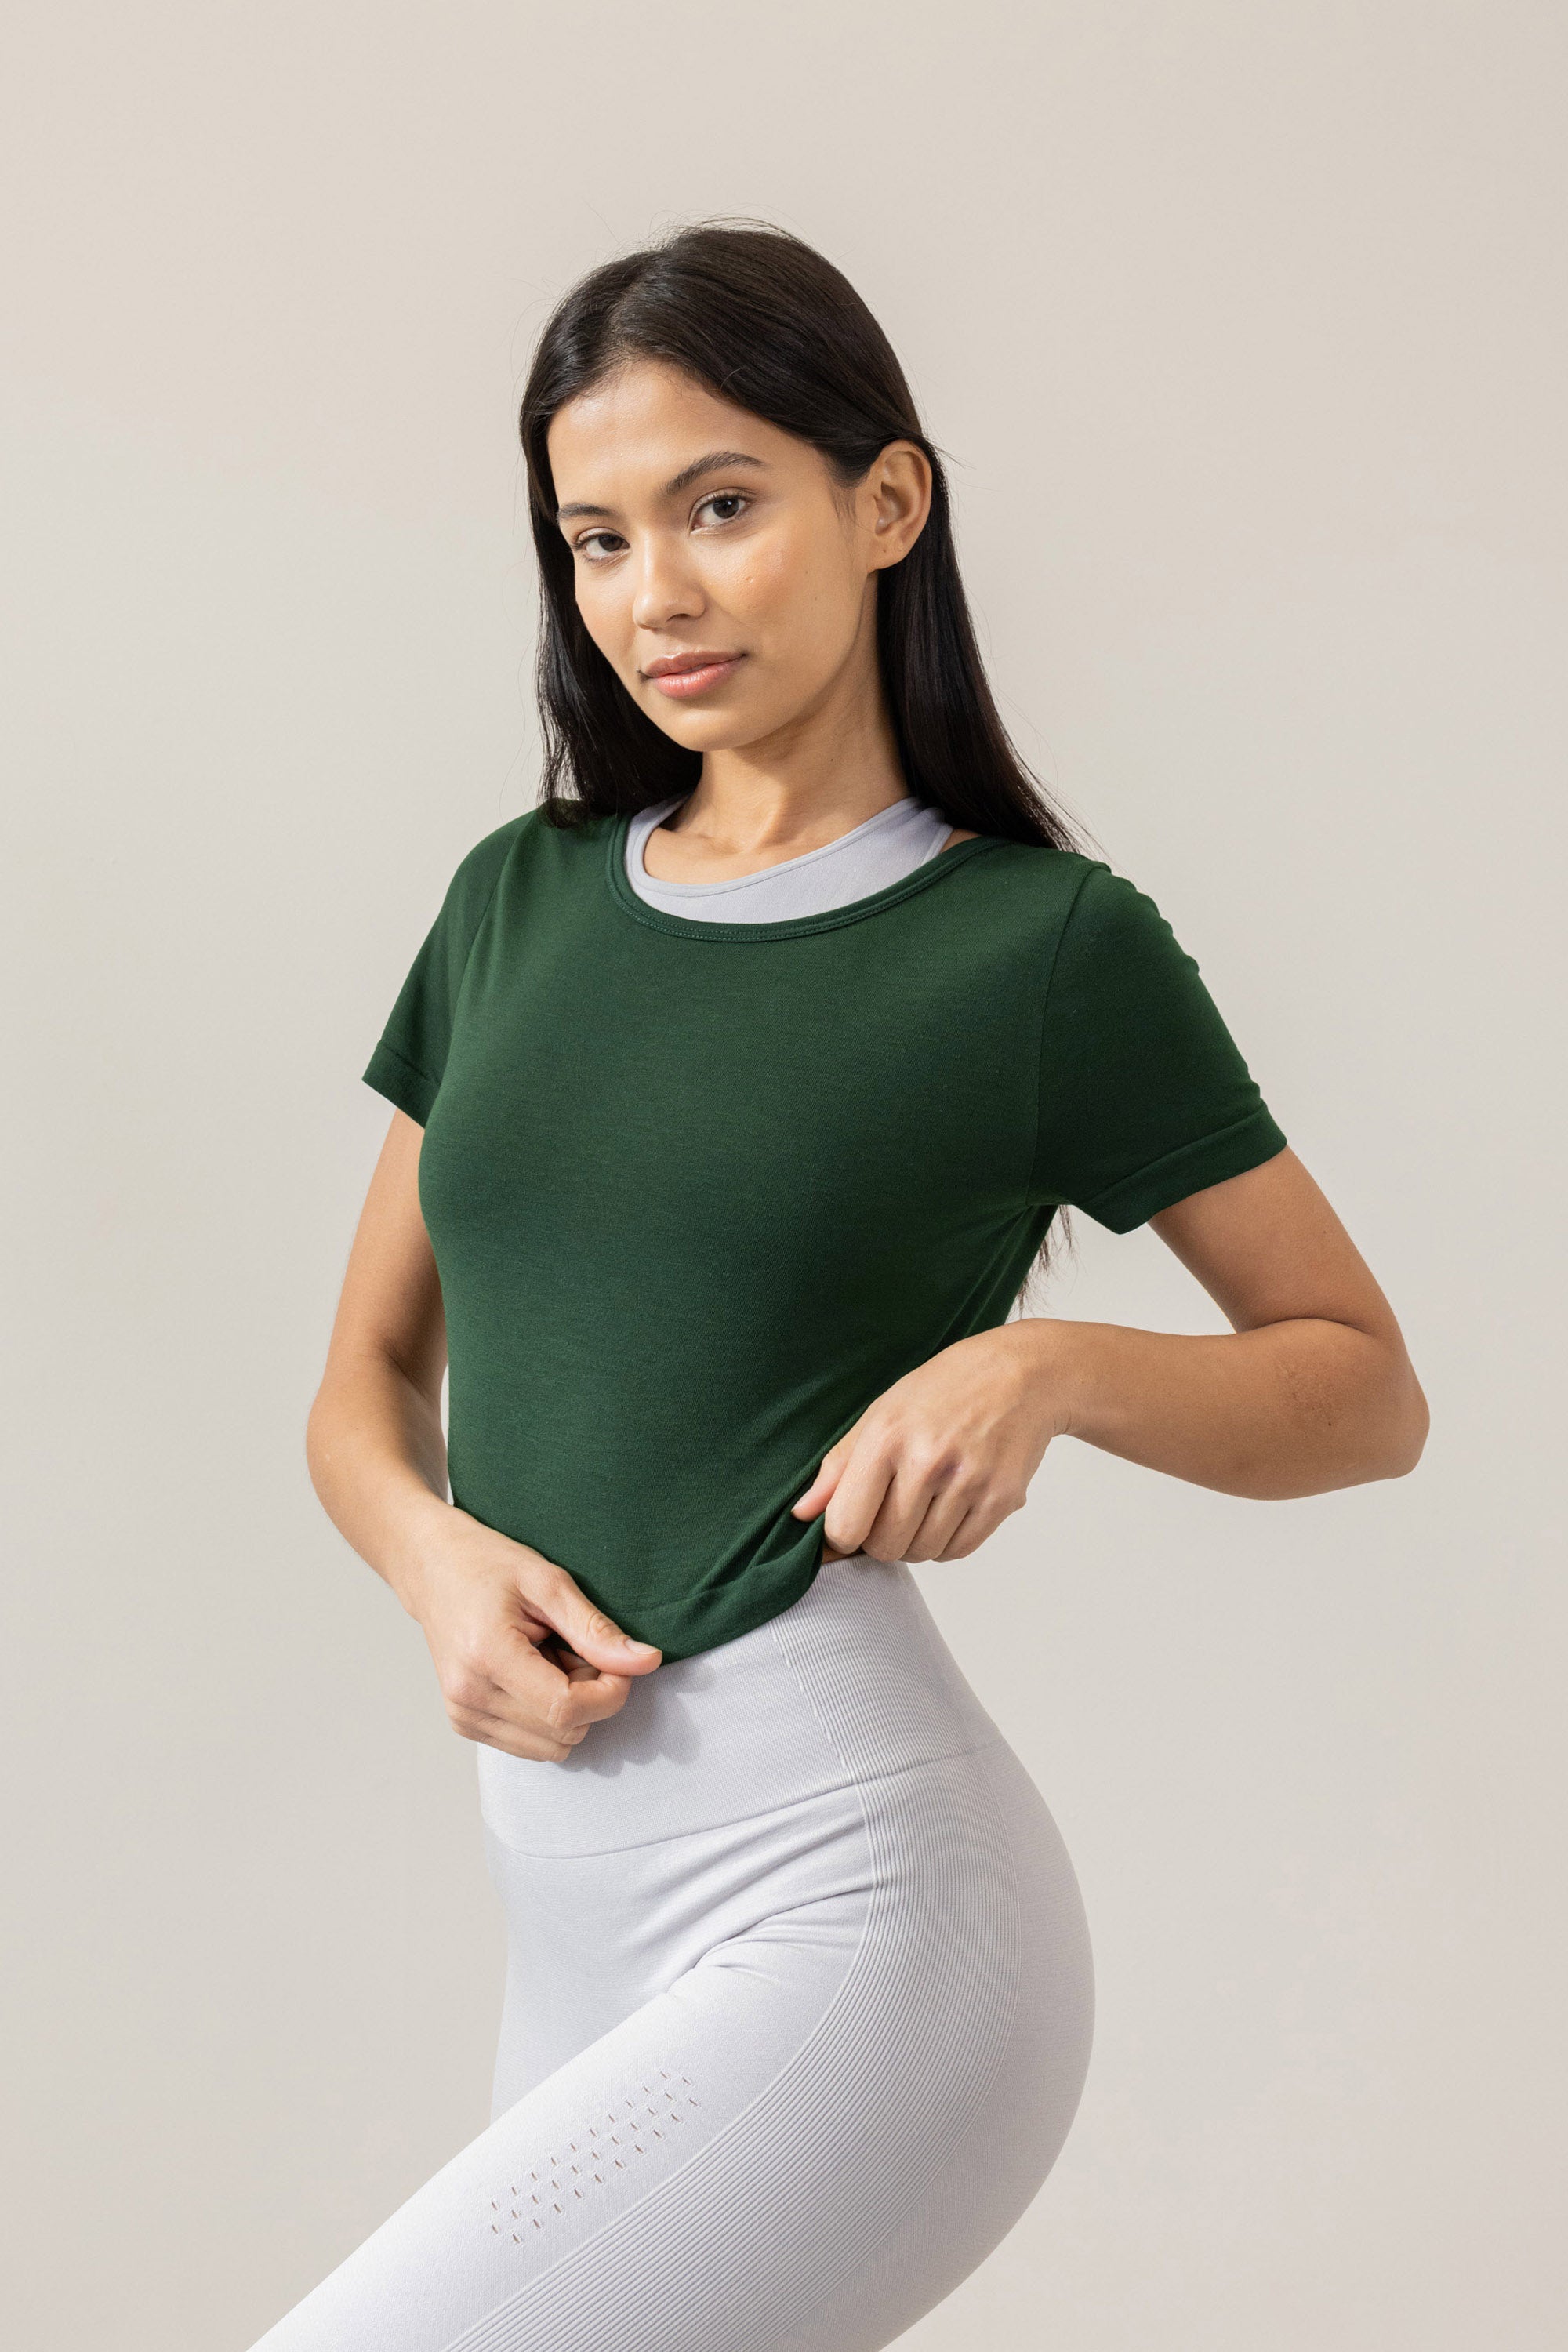 Meet our dark green Frances Modal Tee - your go-to for yoga or any workout! With a cropped length and low back, it's perfect for layering over leggings and a sports bra. Crafted from gentle Lenzing modal fabric blended with recycled polyamide, it offers unmatched softness and comfort. Cut to meet your leggings' waistband, it's a versatile must-have for your activewear collection. Experience comfort and style with Frances Modal Tee by Jilla Active